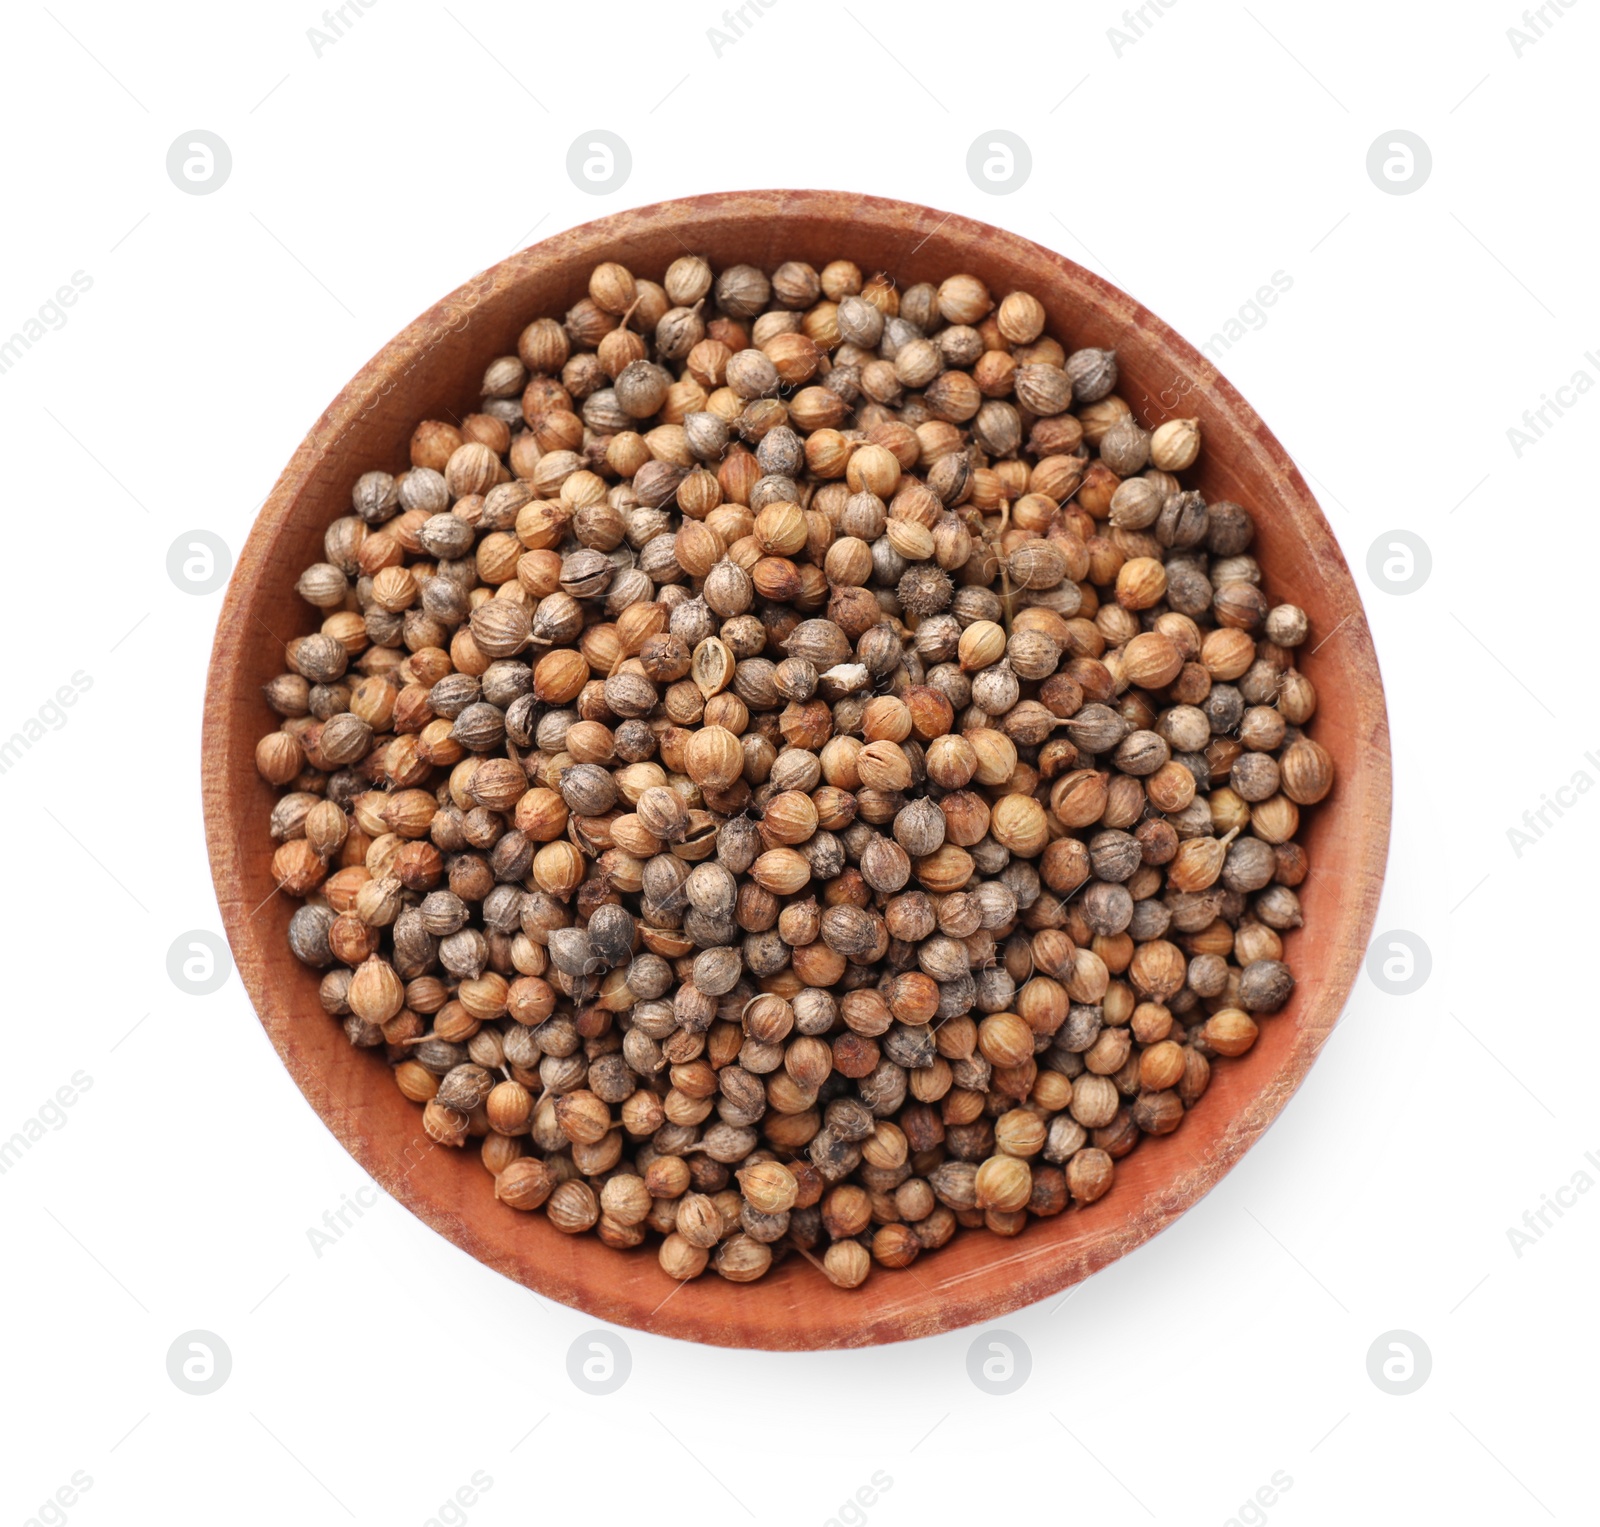 Photo of Wooden bowl of coriander grains on white background, top view